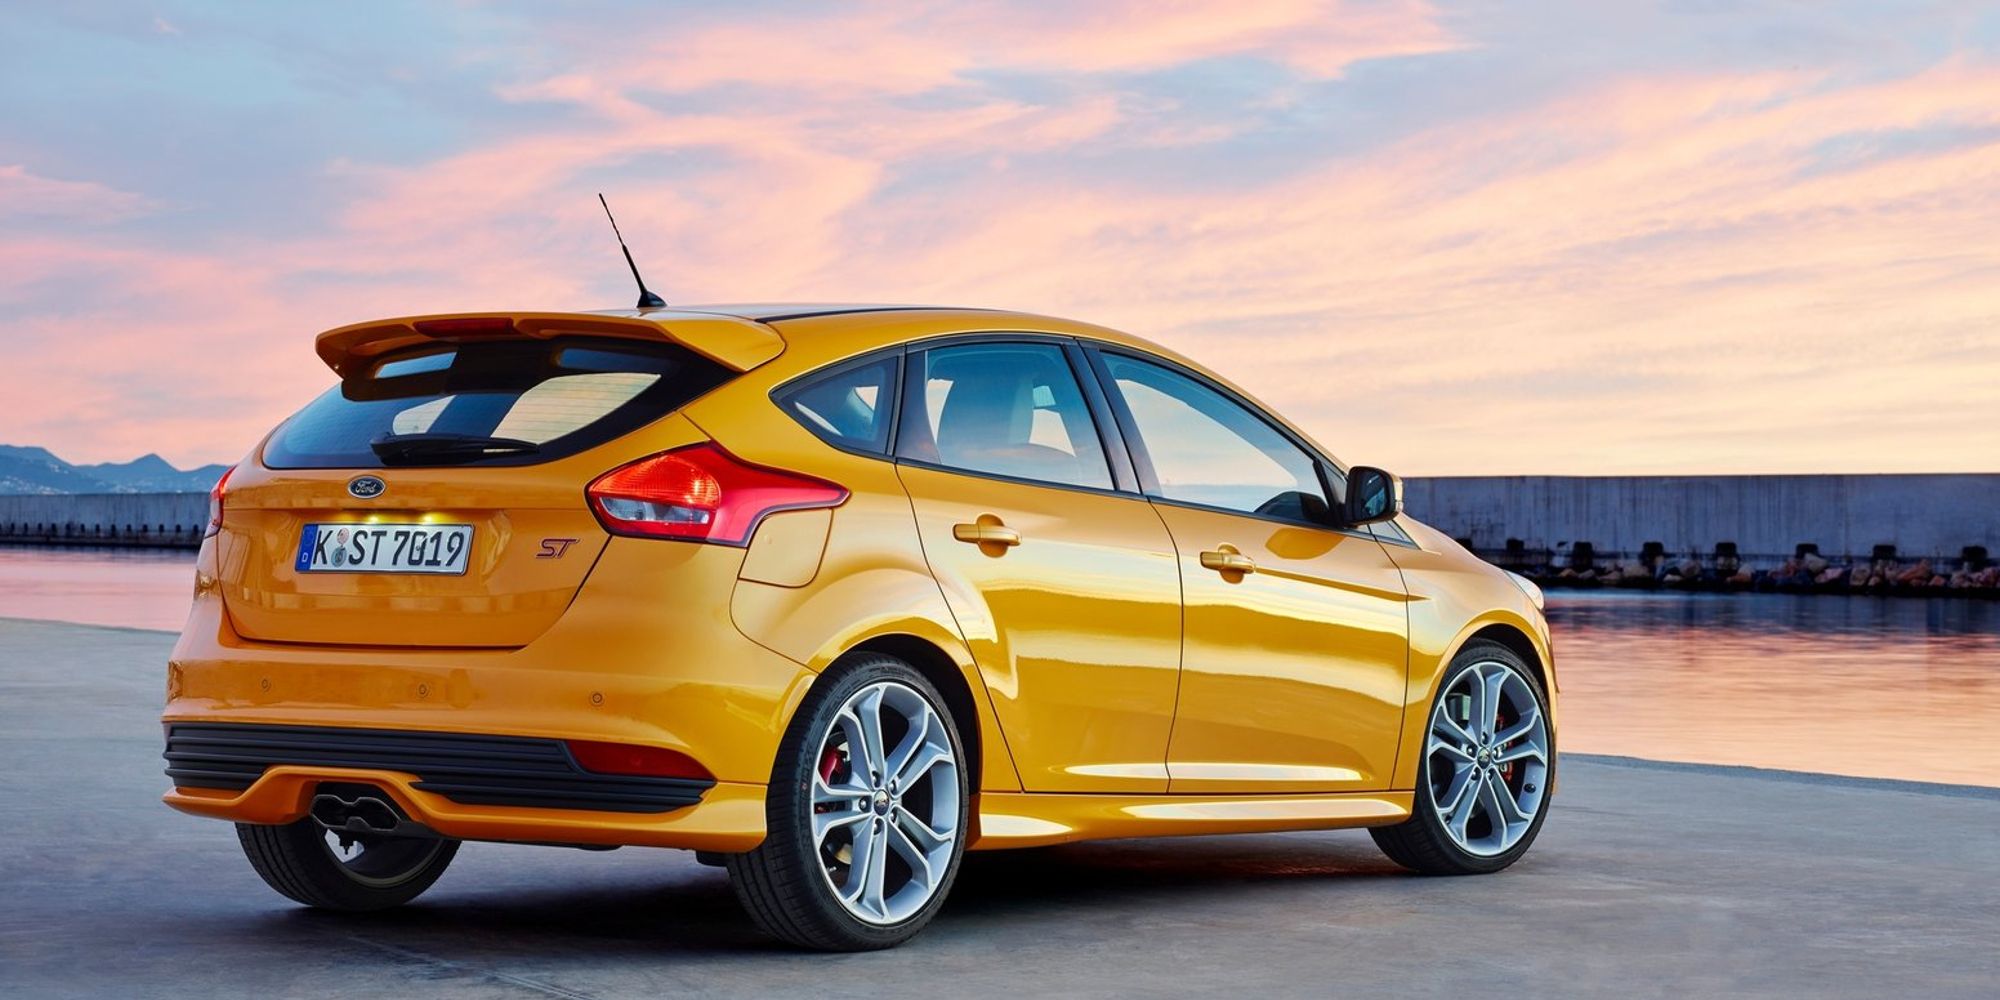 Rear 3/4 view of the Focus ST (facelift)